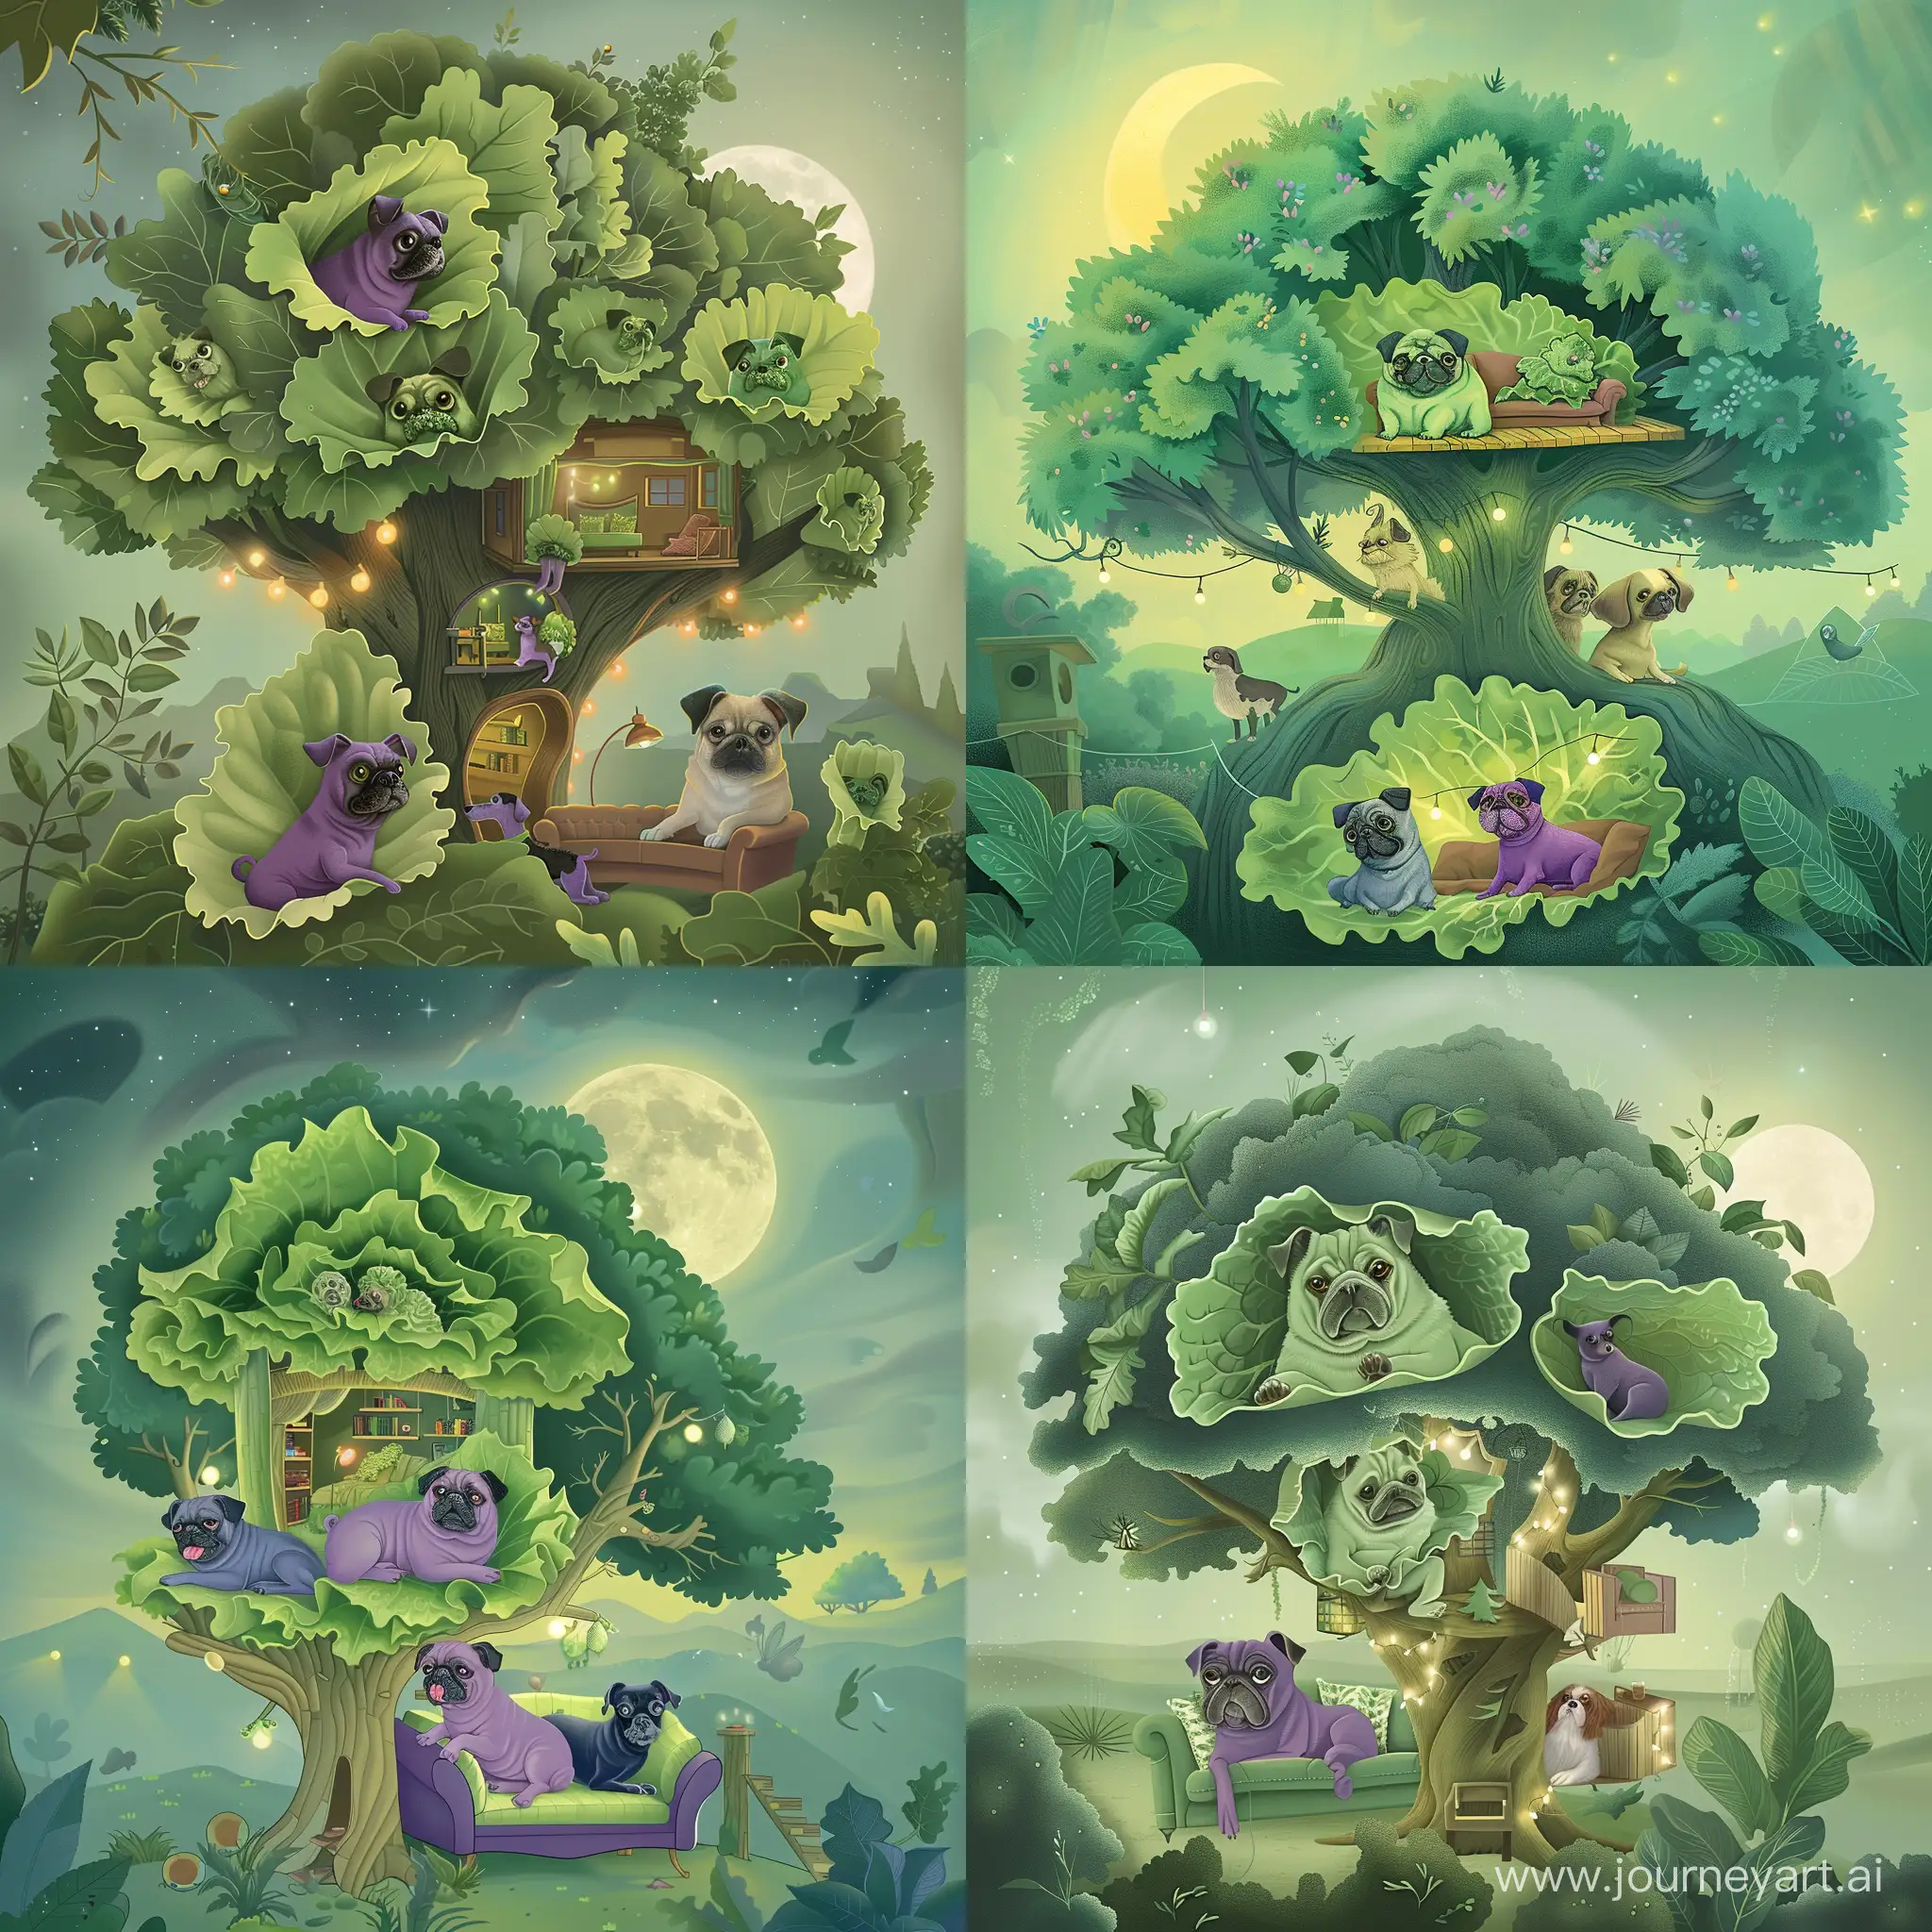 grumpy green lettuce pug dogs, with purple greyhound and periwinkle brussels griffon, all dogs inside a large tree house, tree house in cross section with interiors shown, one dog sites on a couch, soft night with moon in the background, misty background, lights in the tree, soft foliage, seafoam green, illustration